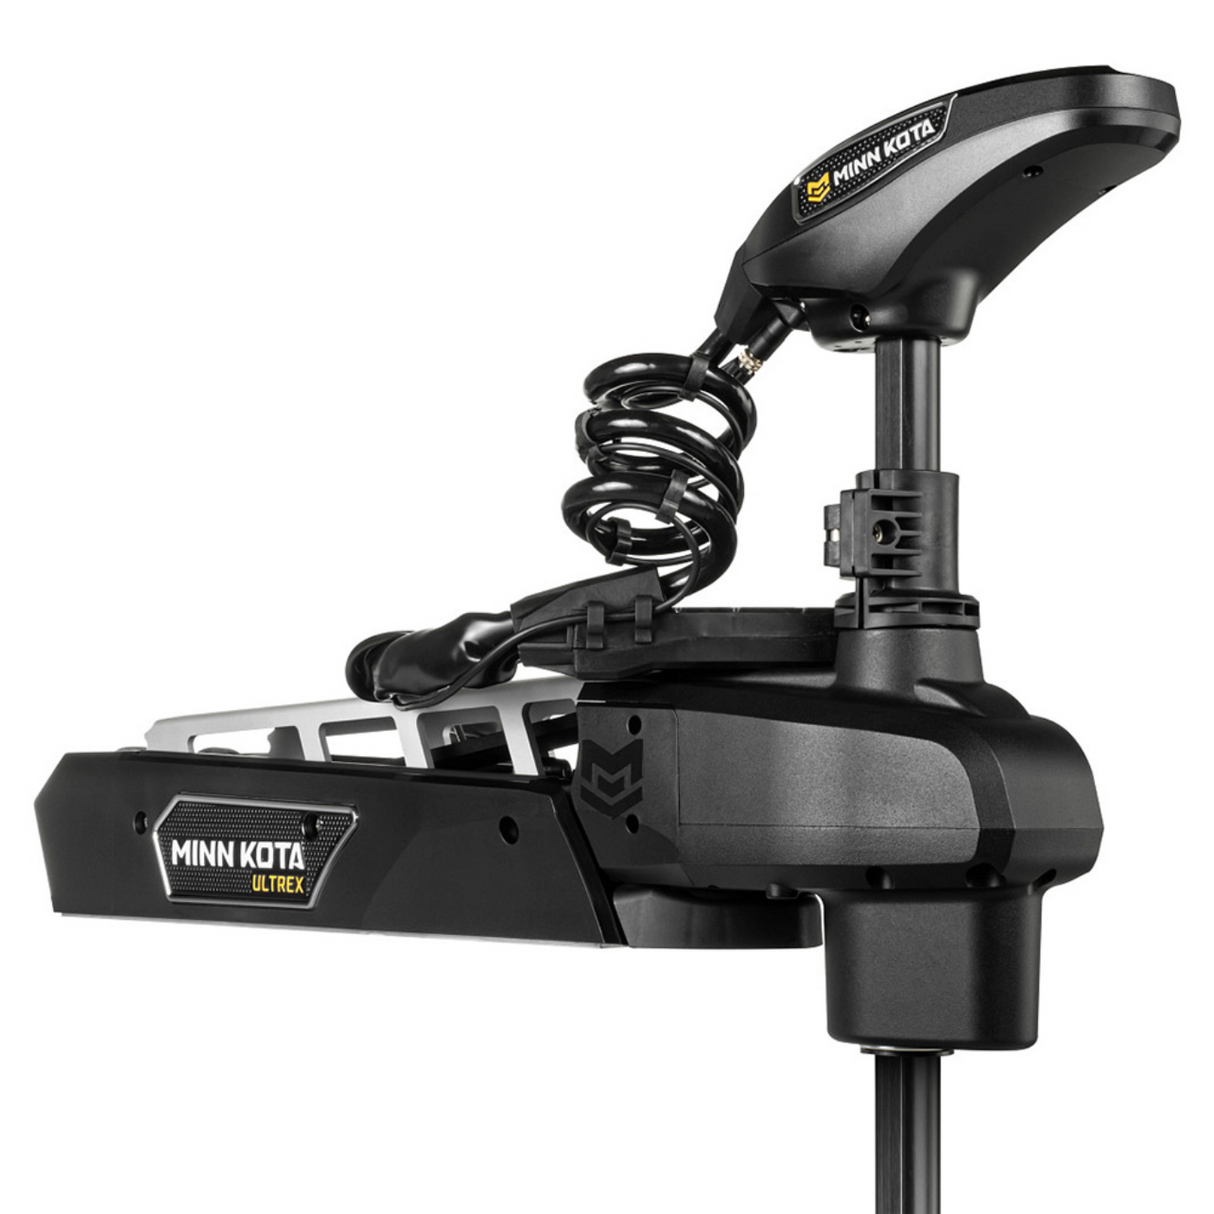 Ultrex Quest™ 90/115 Trolling Motor with Remote - Mega Down/Side Imaging - 60 in.